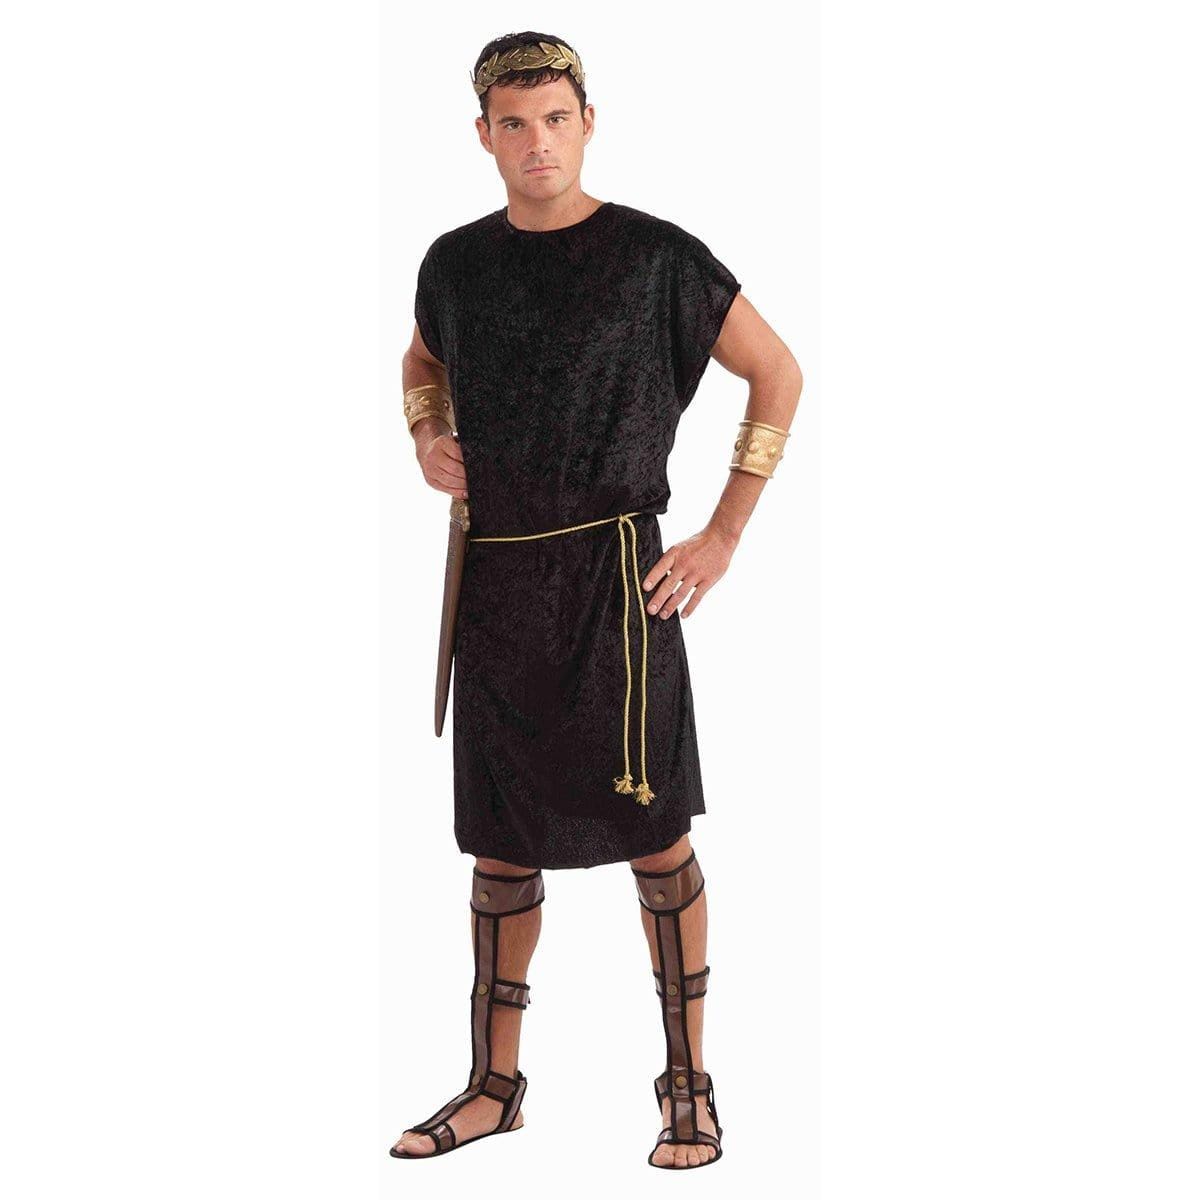 Buy Costume Accessories Black roman tunic for plus size men sold at Party Expert